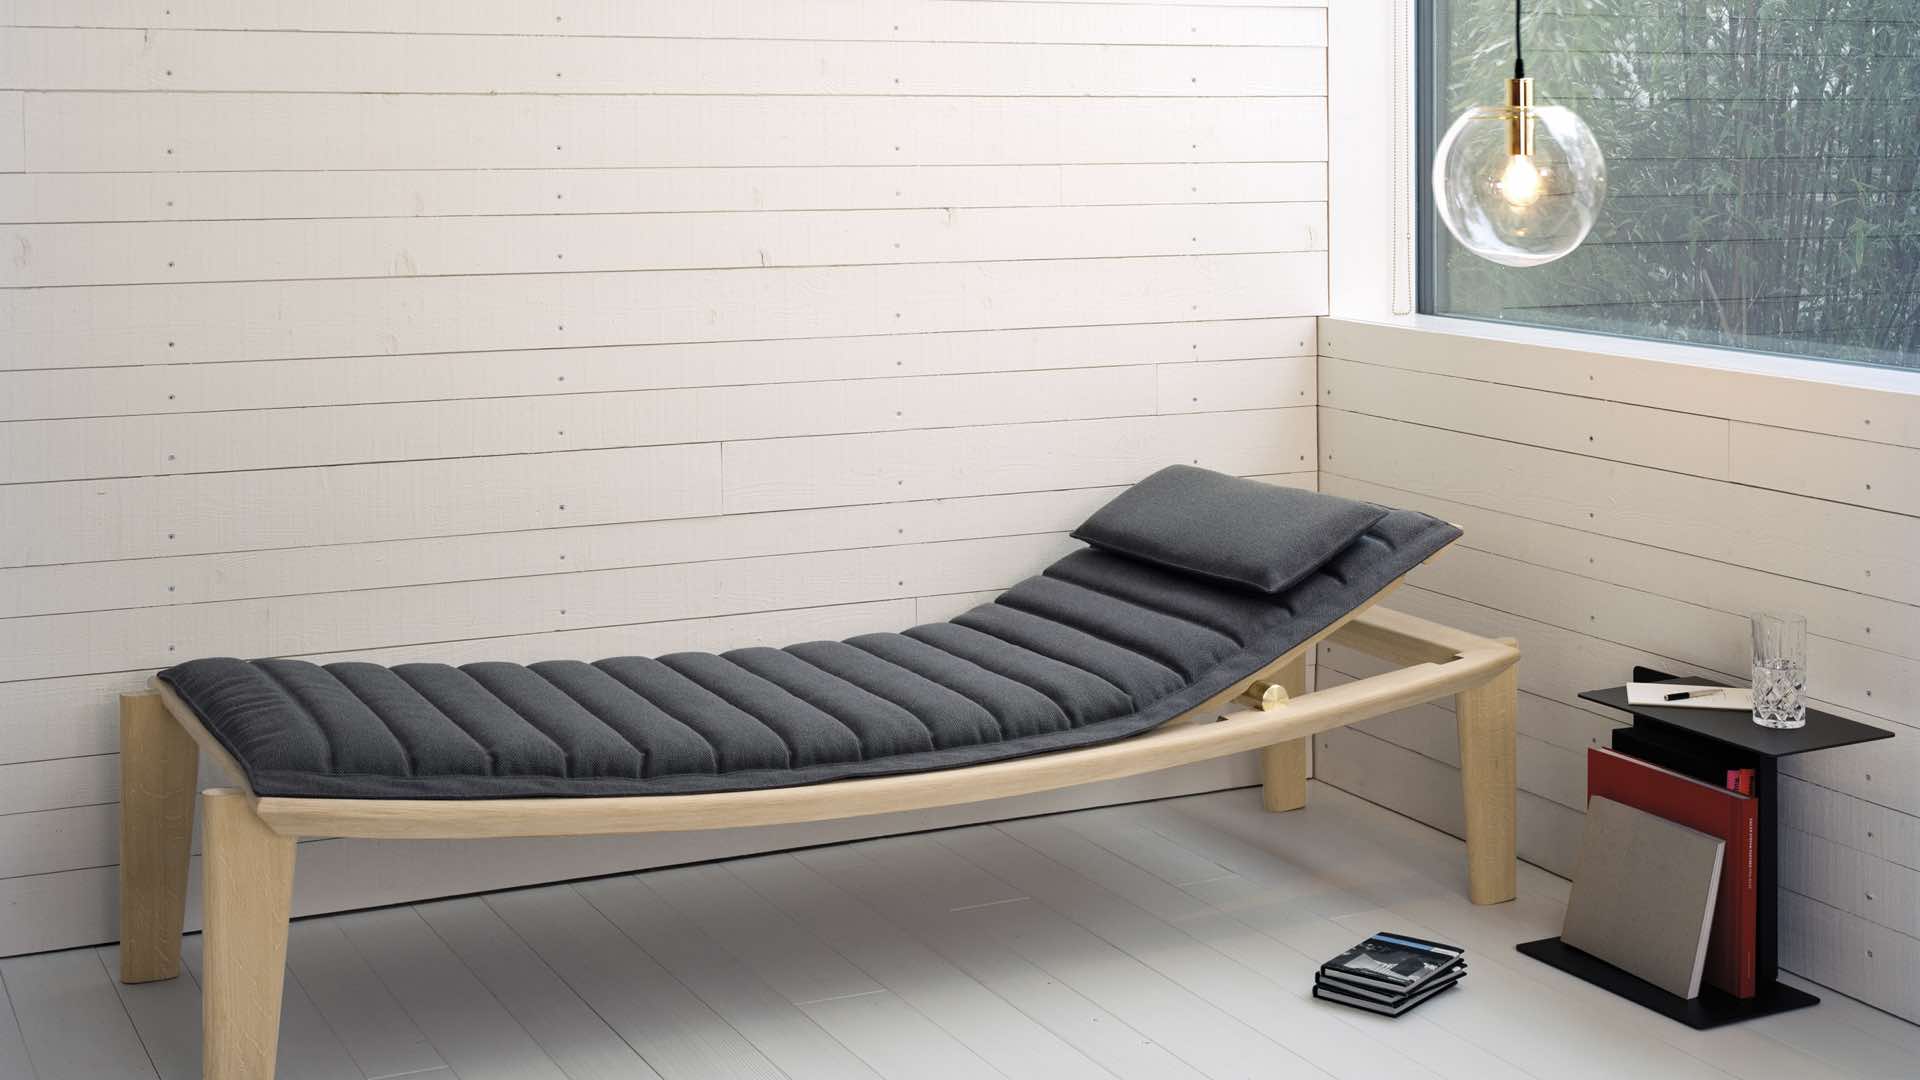 classicon-holzherr-ulisse-daybed-selene-diana-a-ambiente